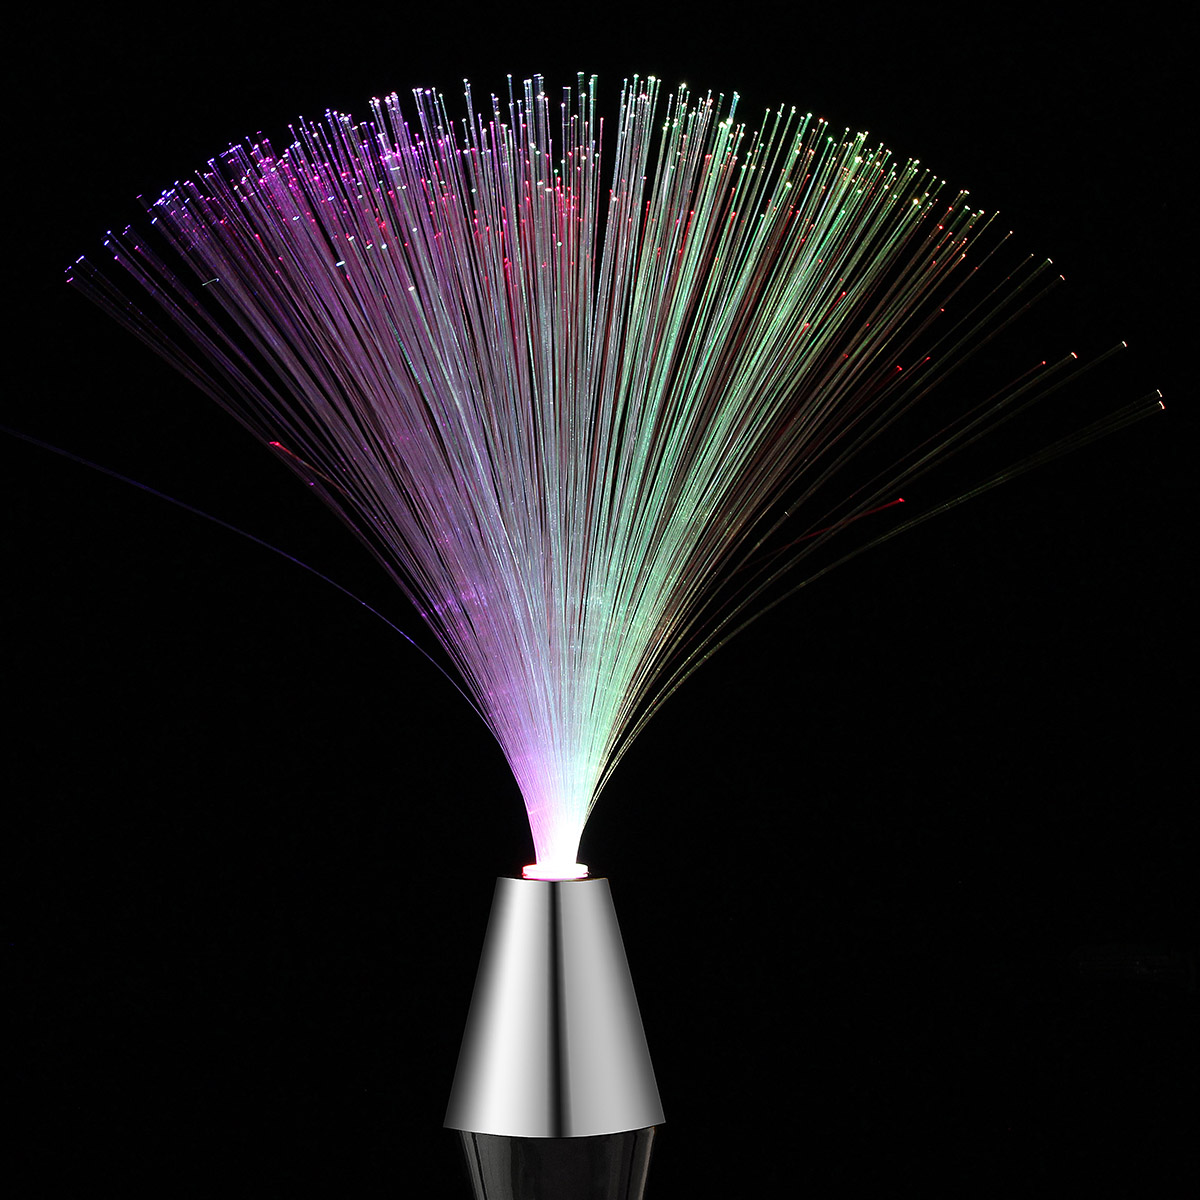 Fiber optic starlight color changing light, Buy 2 Get Extra 10% OFF